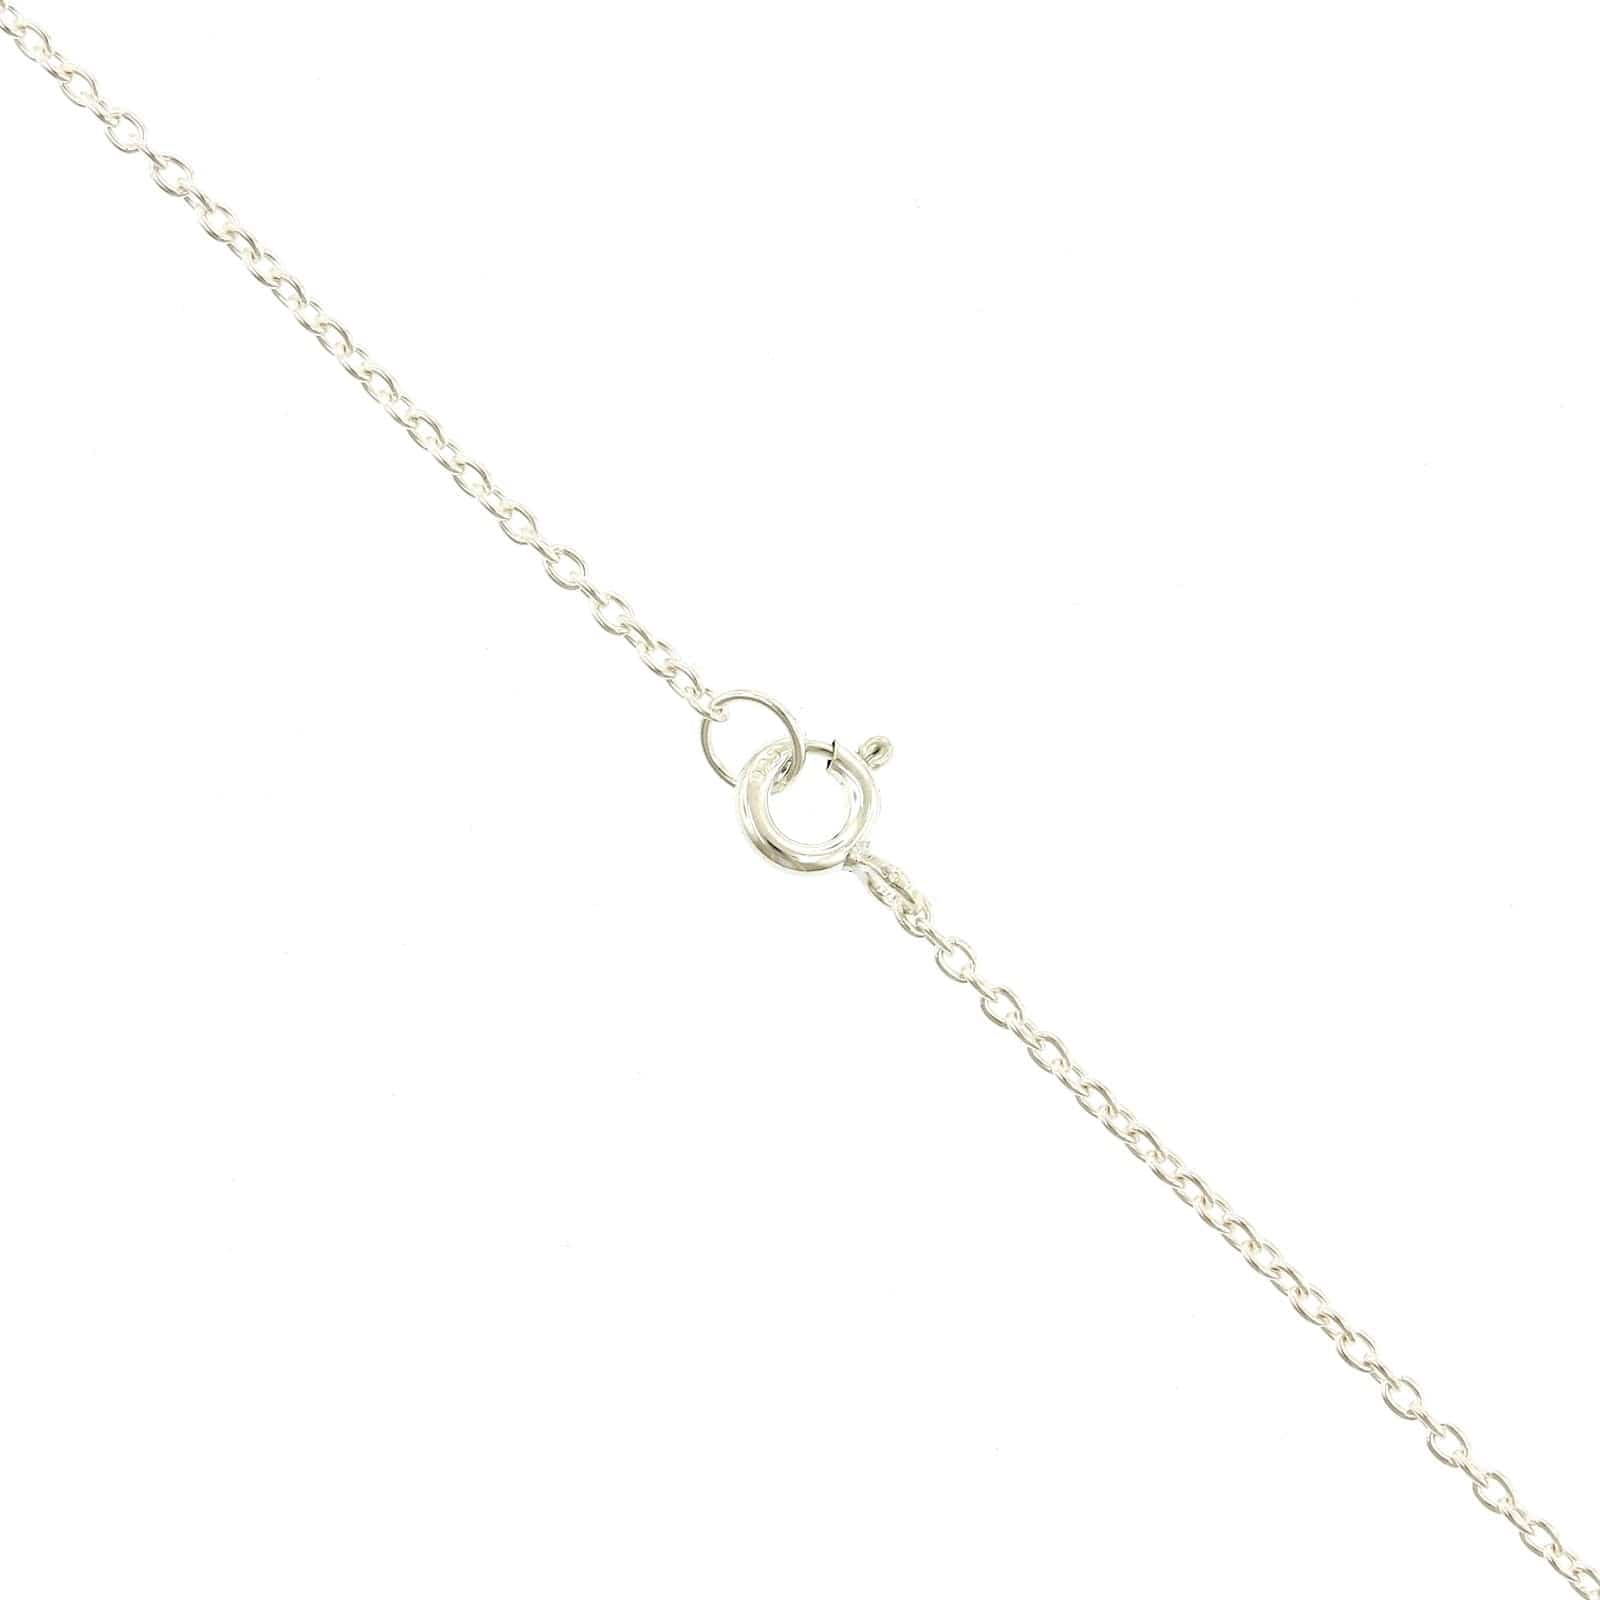 Sterling Silver Dog Paw Charm Necklace